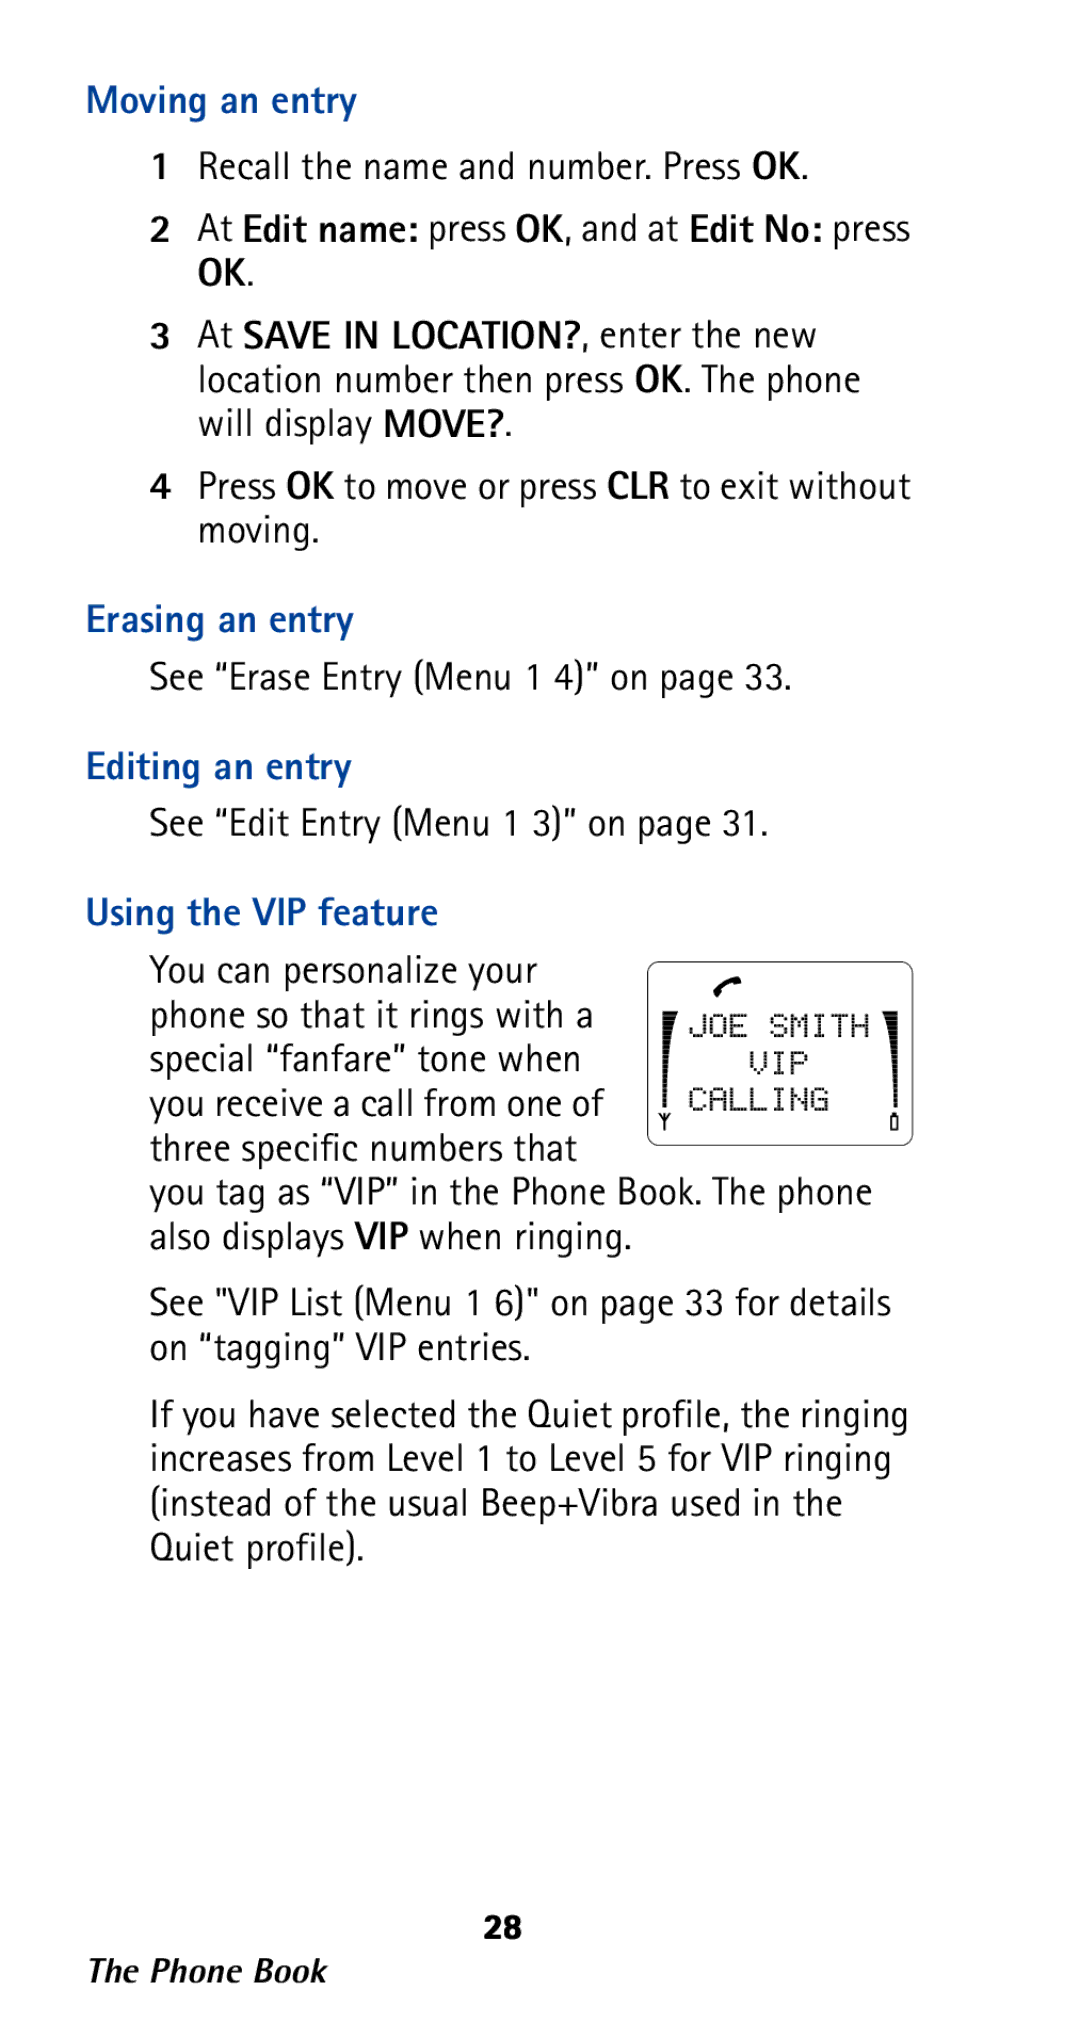 Nokia 282 owner manual Moving an entry, Erasing an entry, Editing an entry, Using the VIP feature 